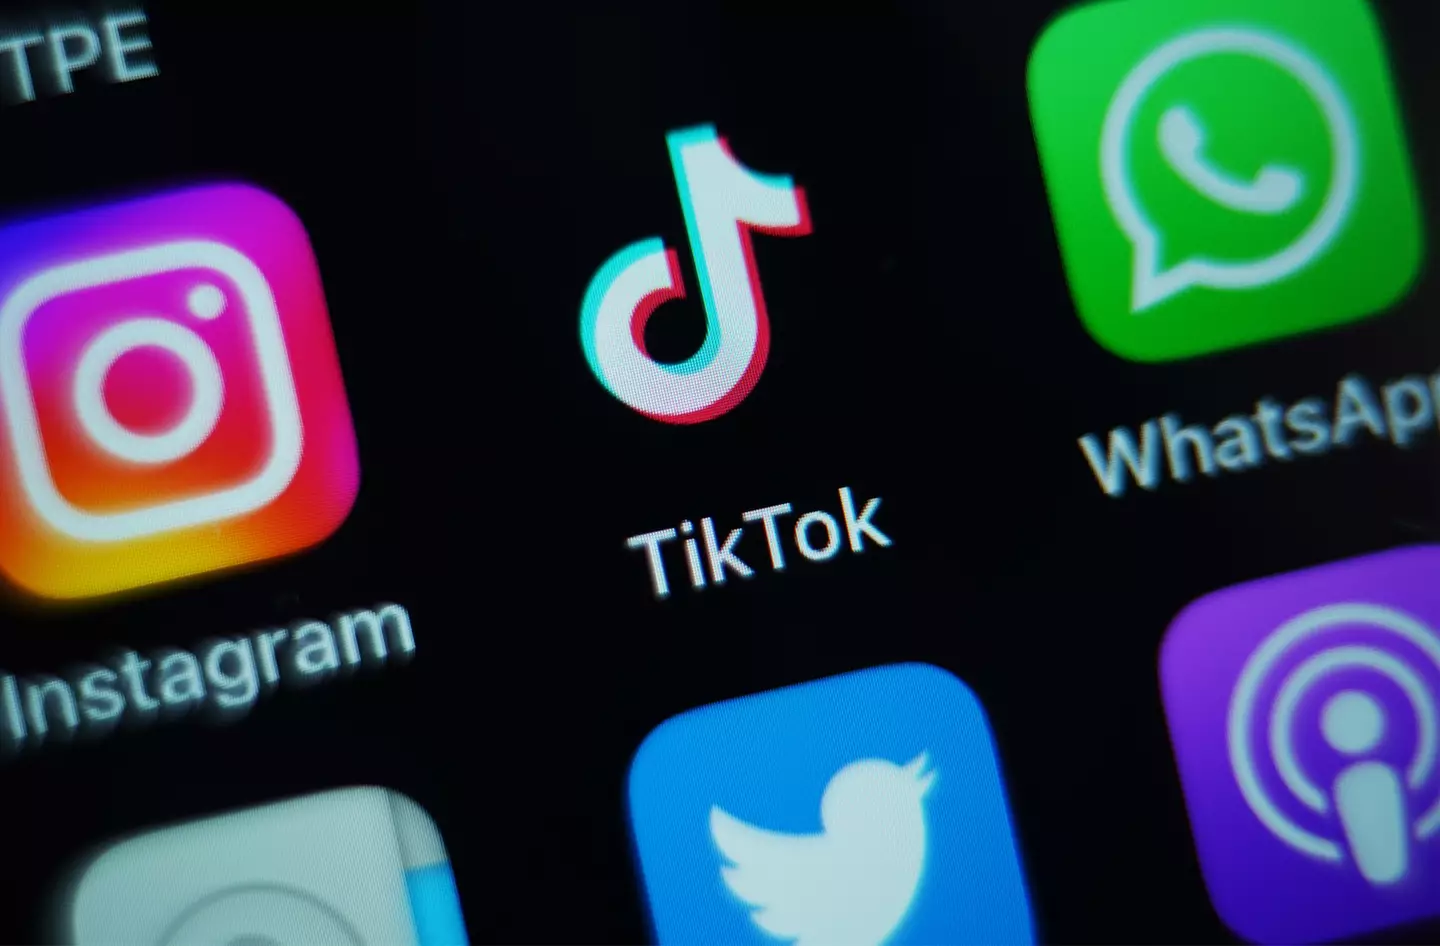 Universal has pulled the plug on extending its deal with TikTok.